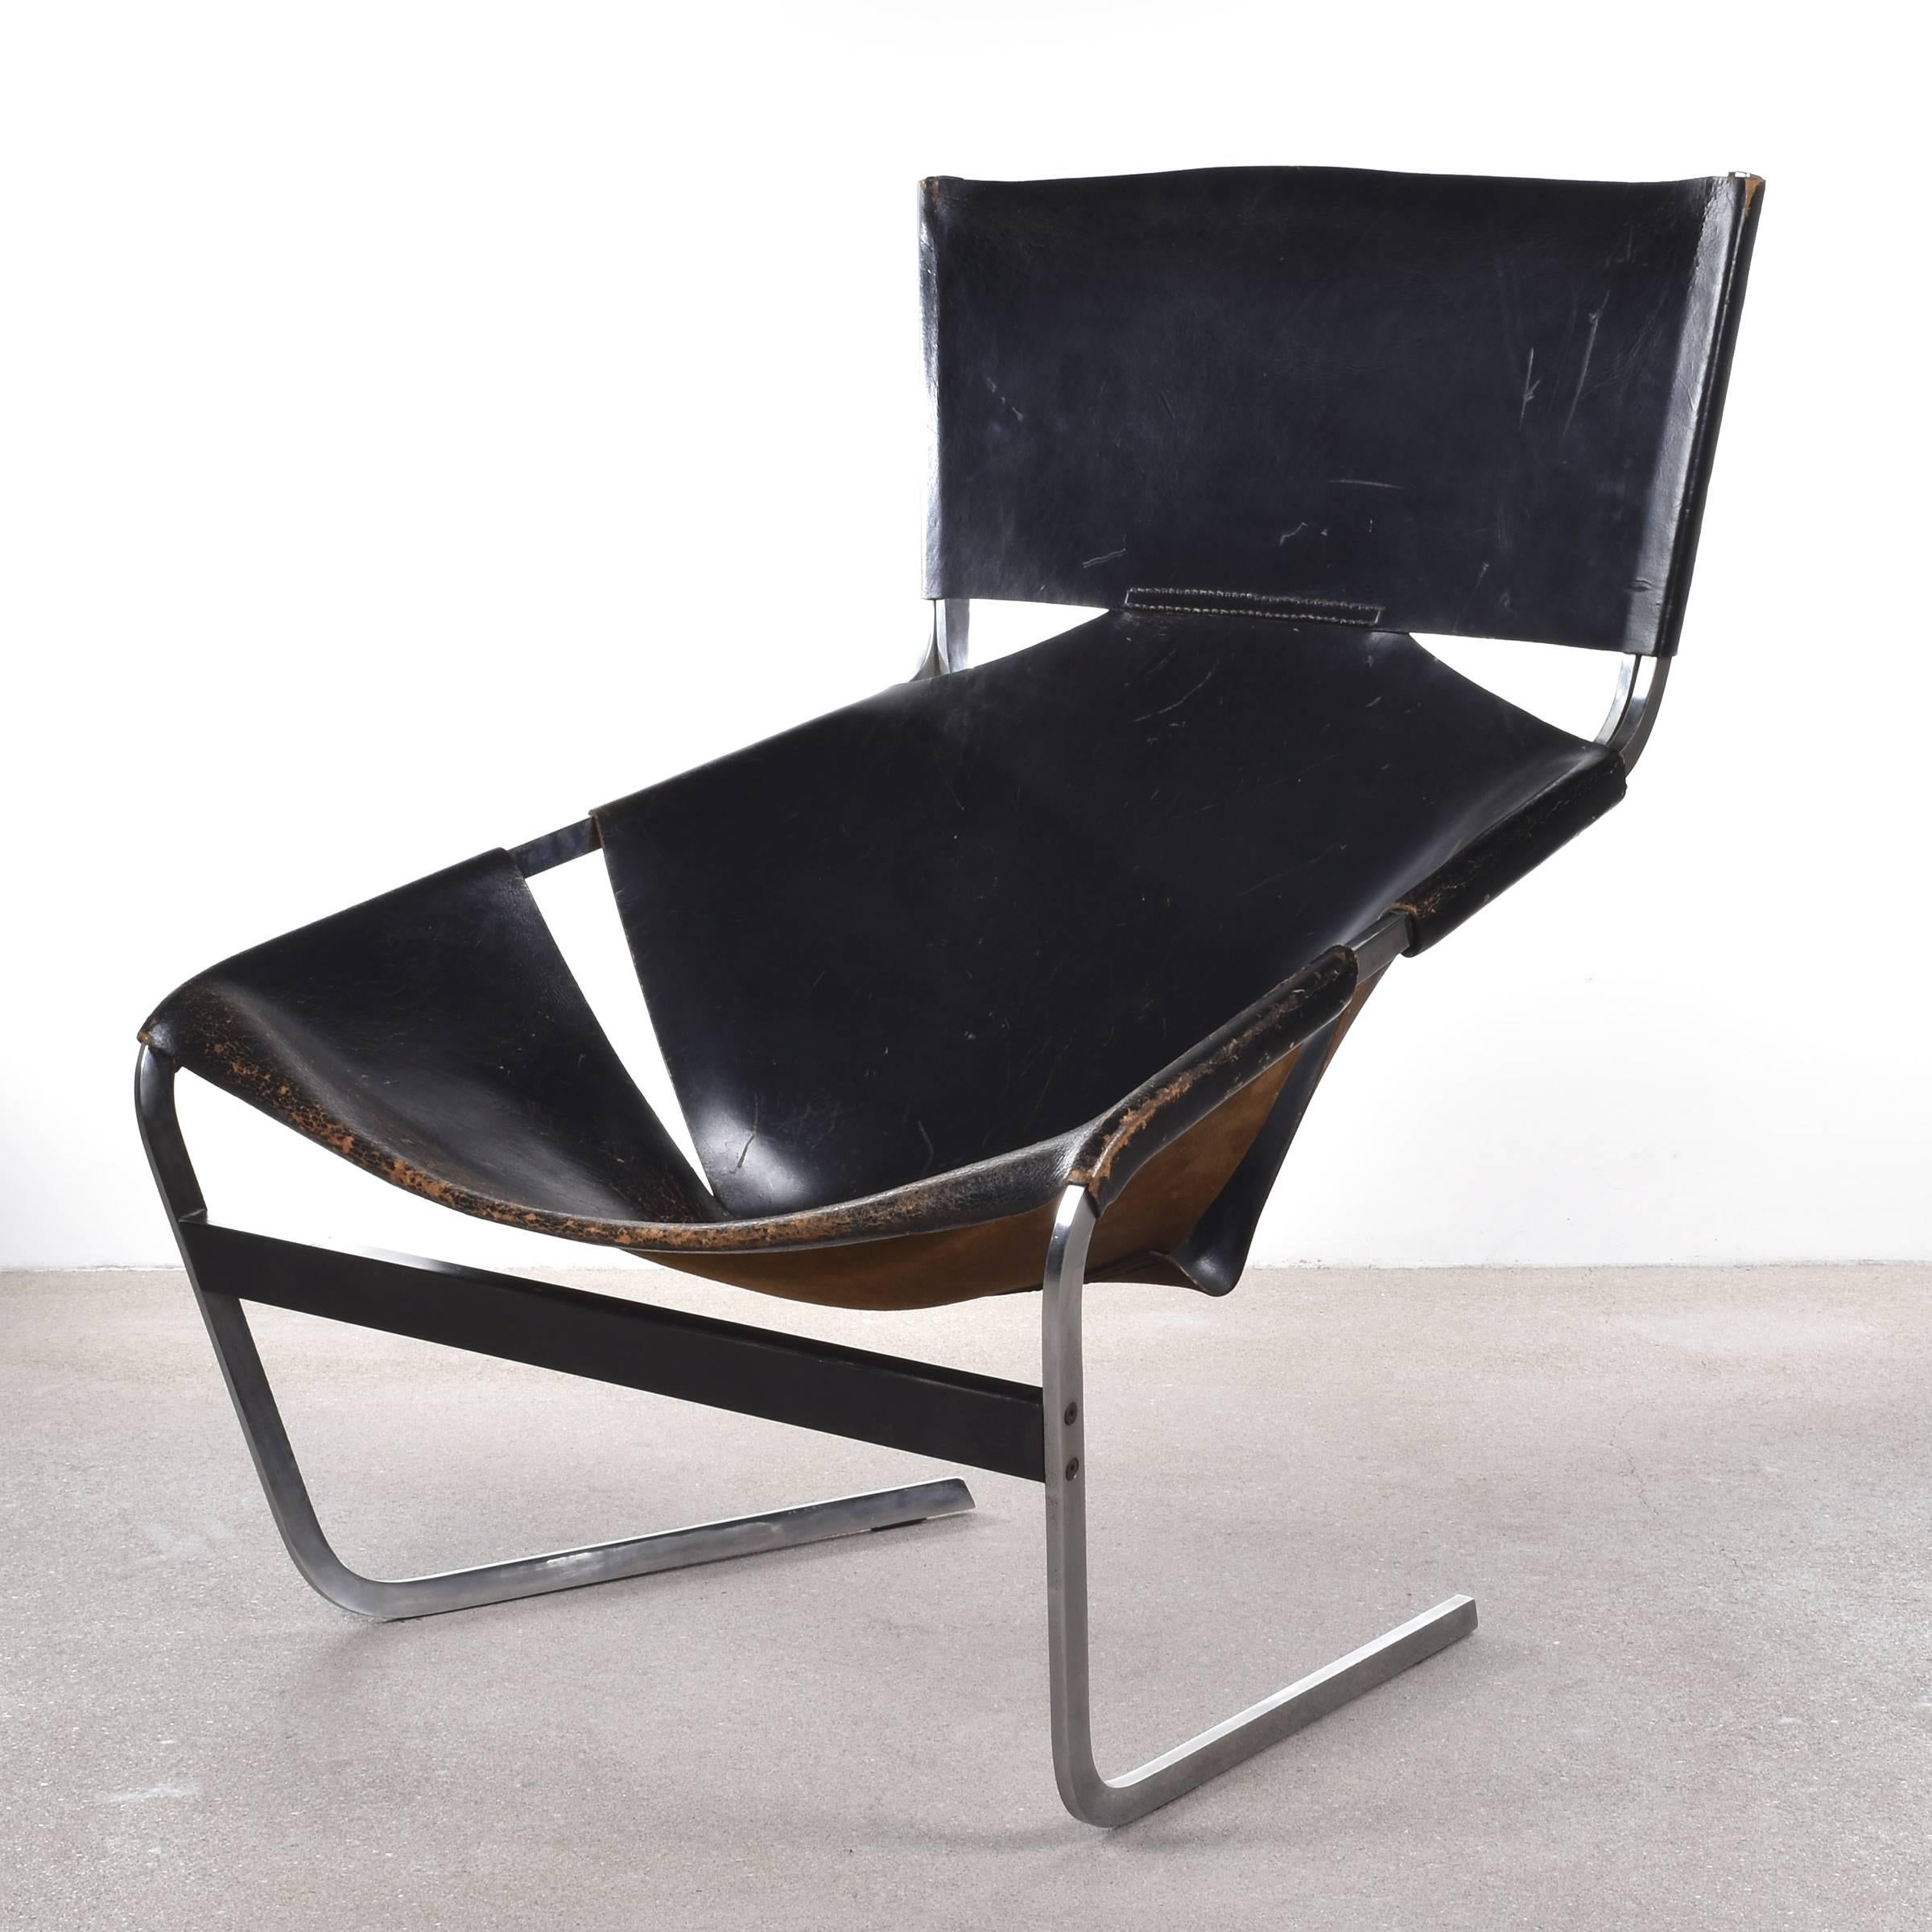 Sturdy, massive and comfortable lounge chair. Complete original chair both saddle leather and stitching with very good patina. Signed with Artifort metal label.

Free shipping for European destinations!

We strive for a high level of service and